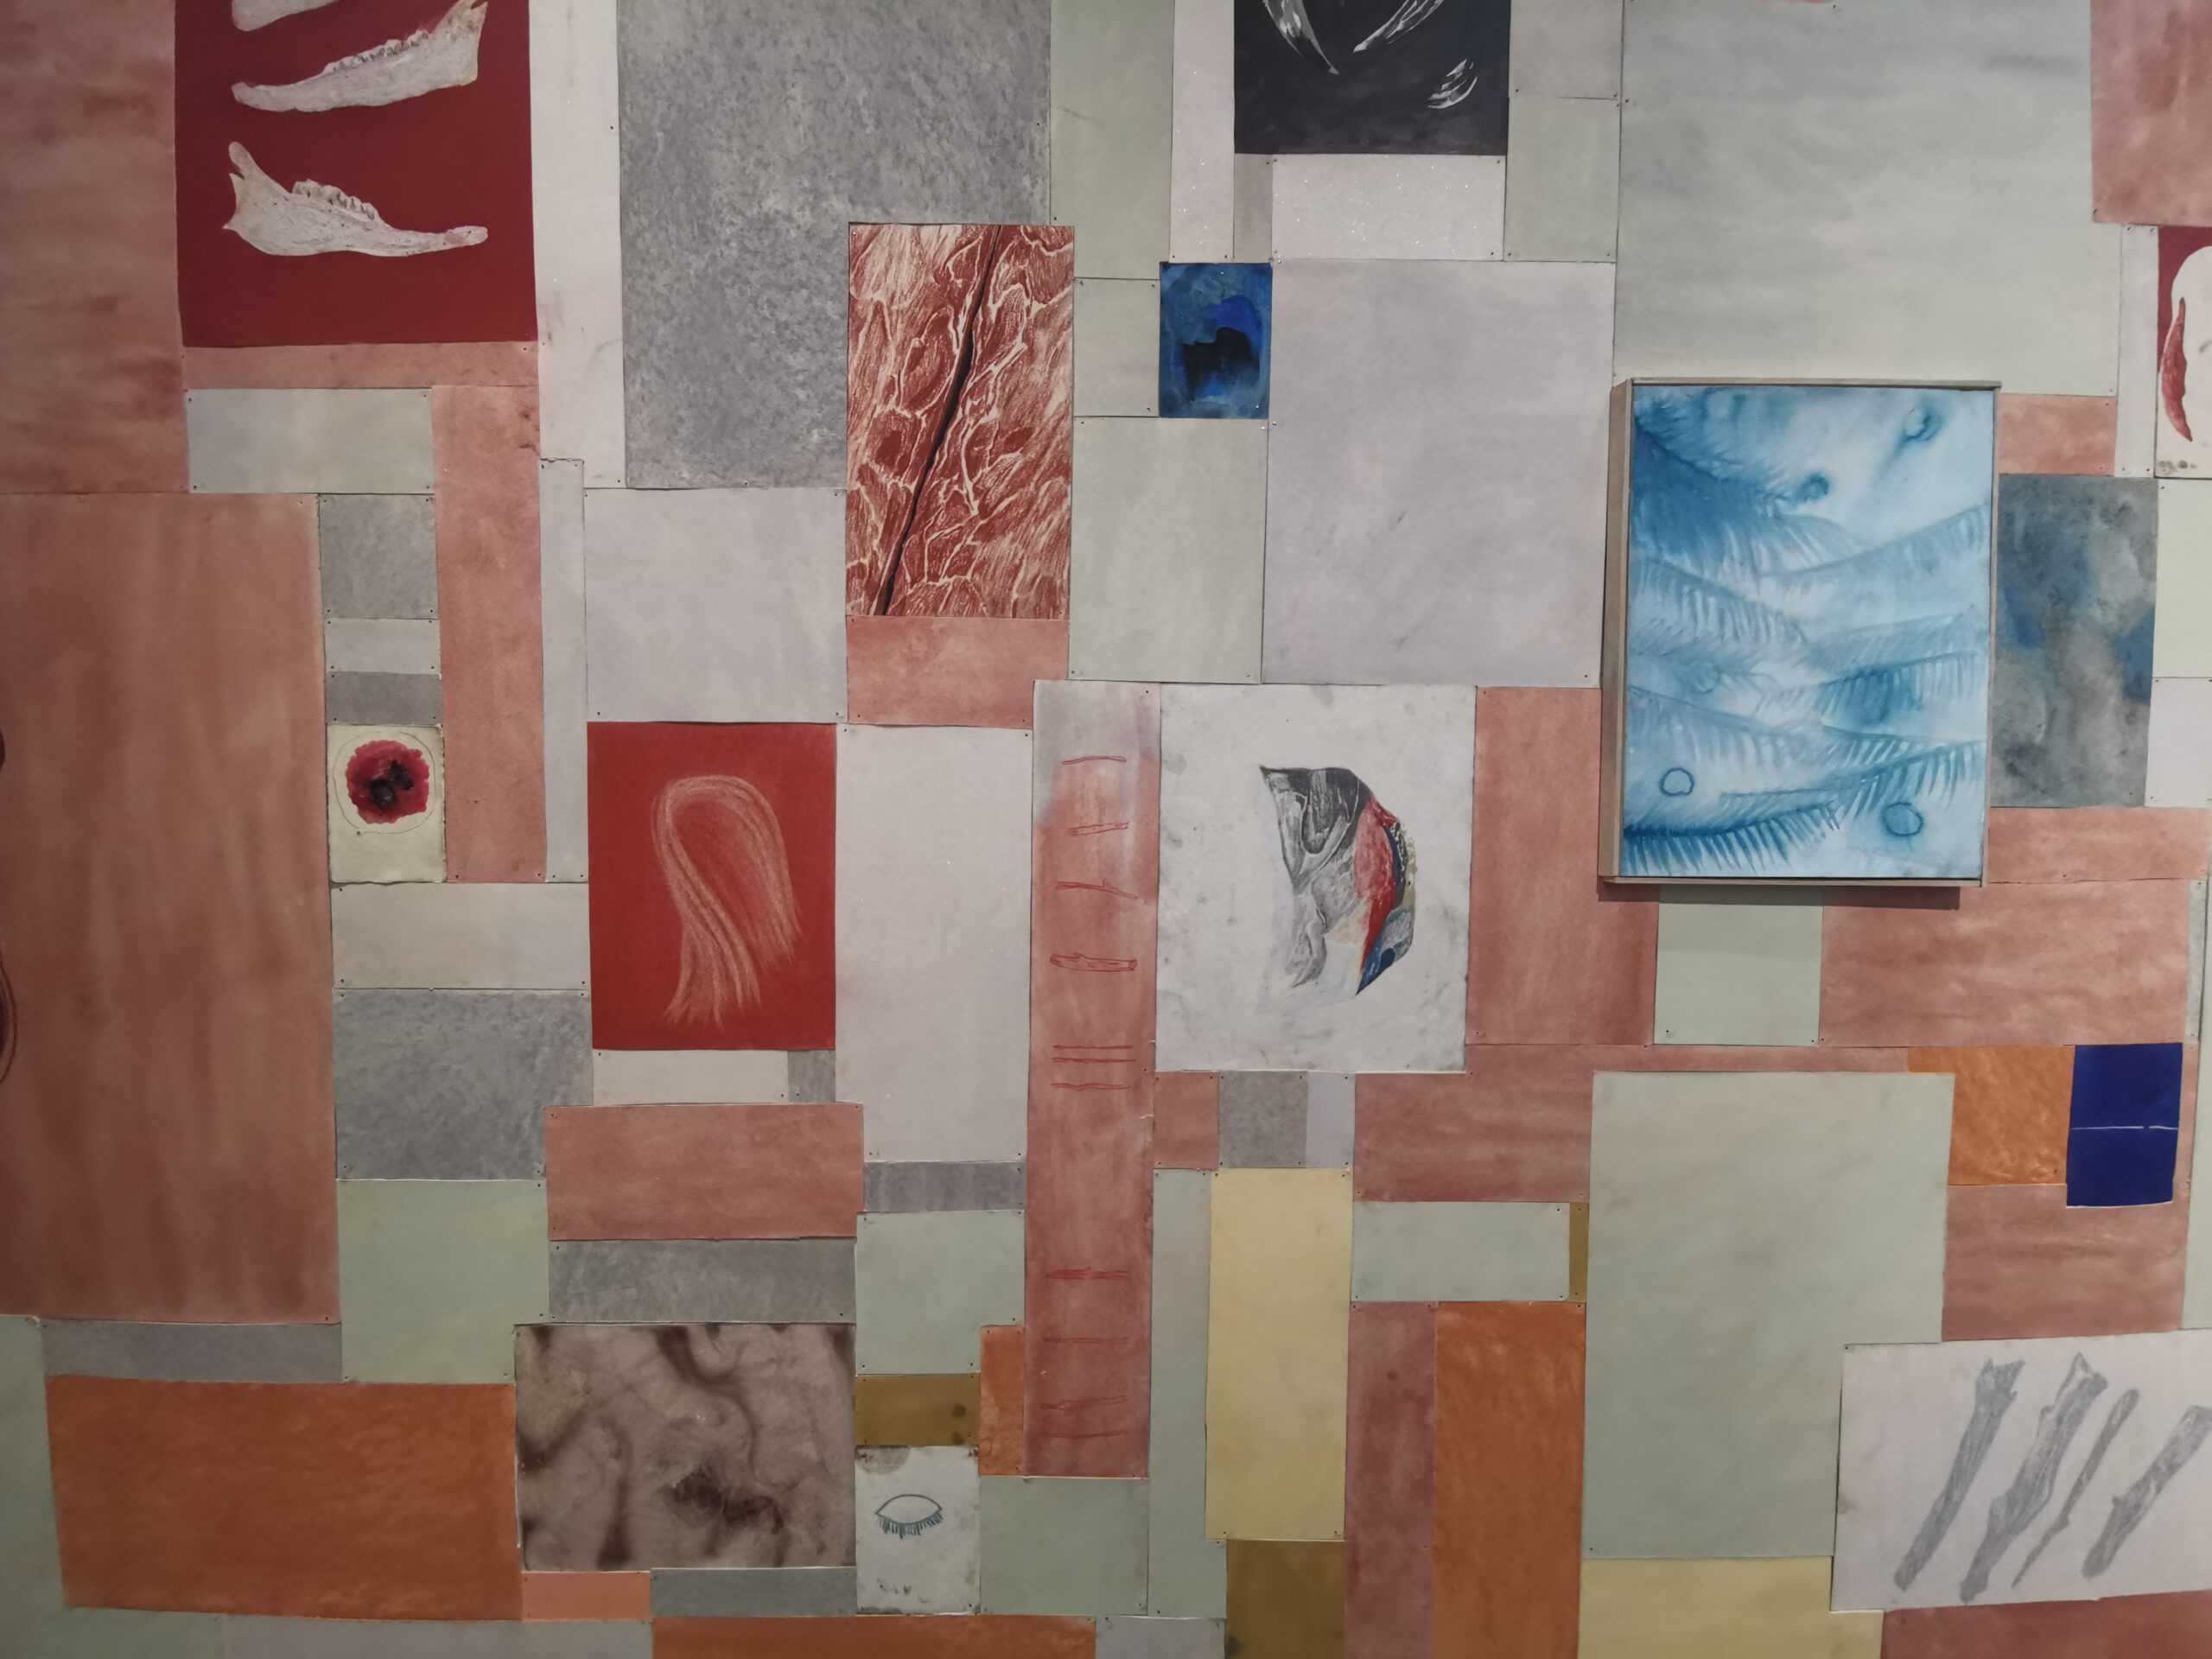 Artworks by Sylvie Ringer in a collage display on a wall